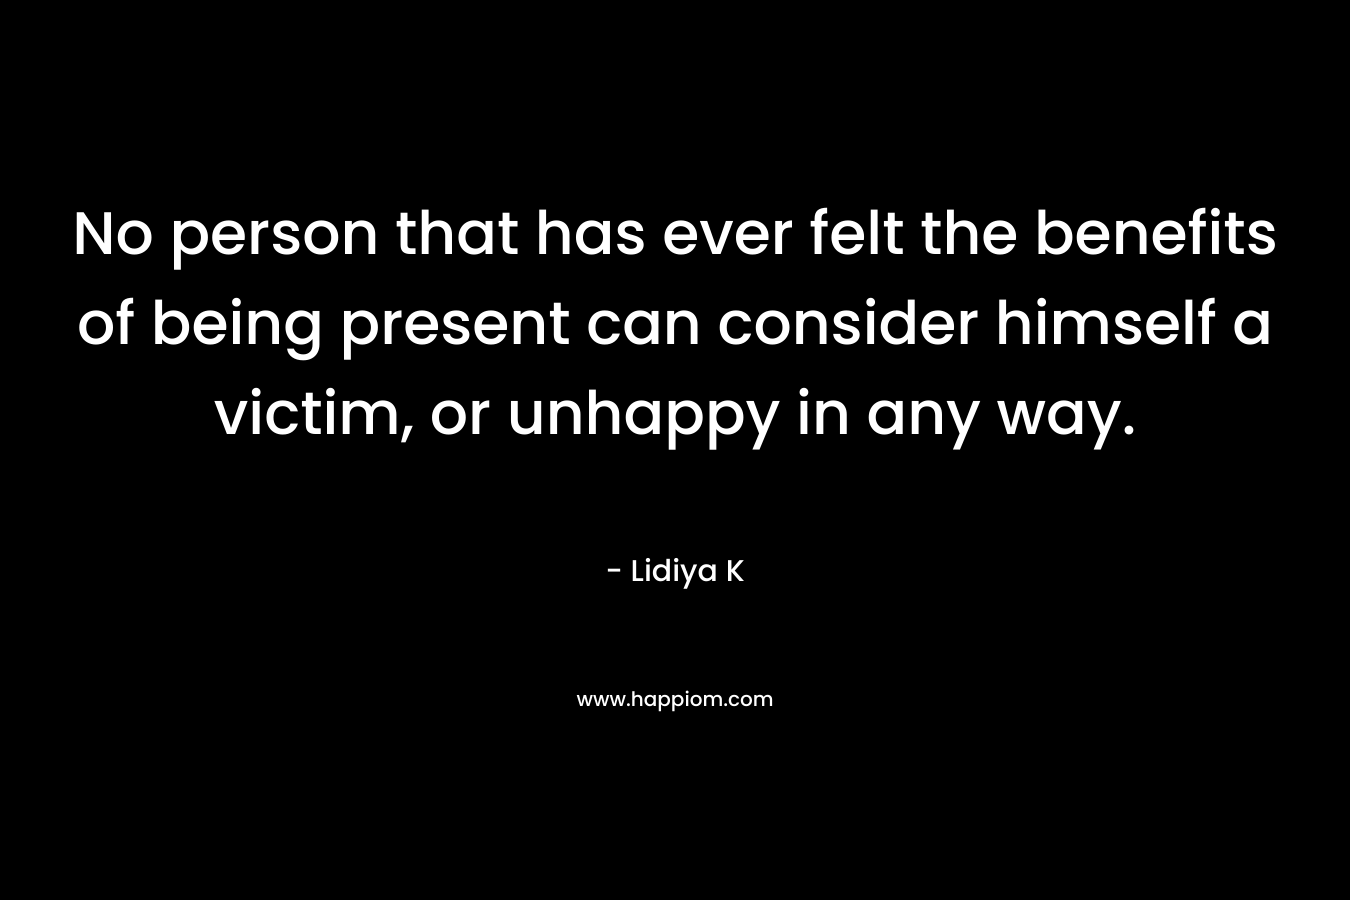 No person that has ever felt the benefits of being present can consider himself a victim, or unhappy in any way. – Lidiya K